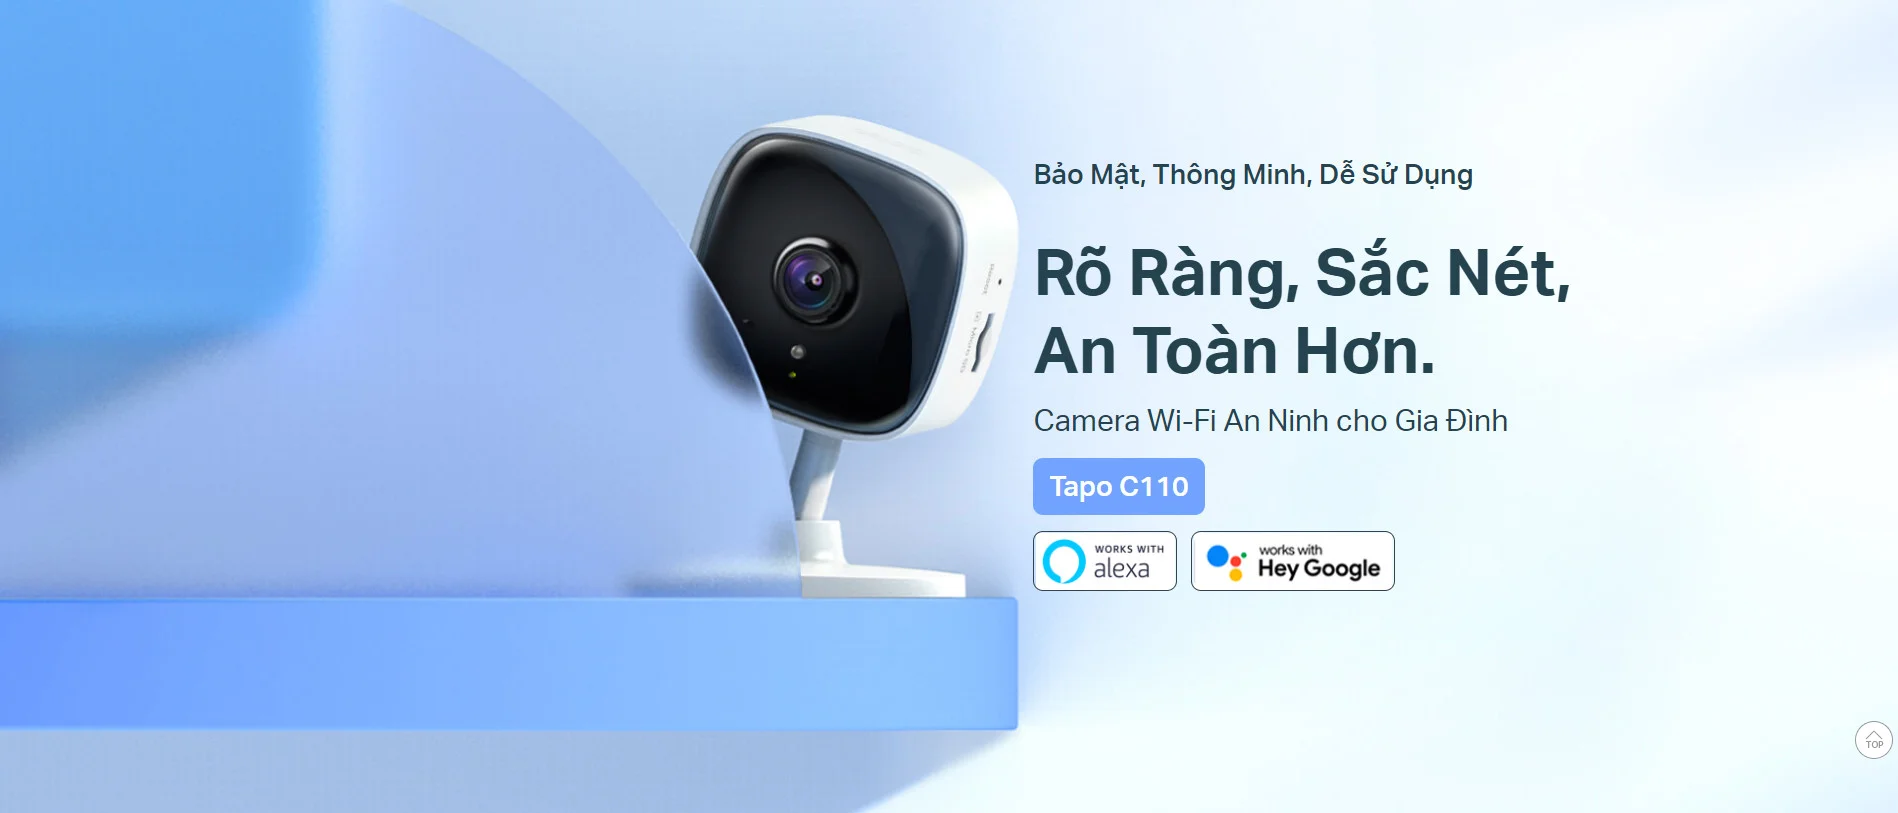 Camera Wif TP-Link Tapo C110 3MP